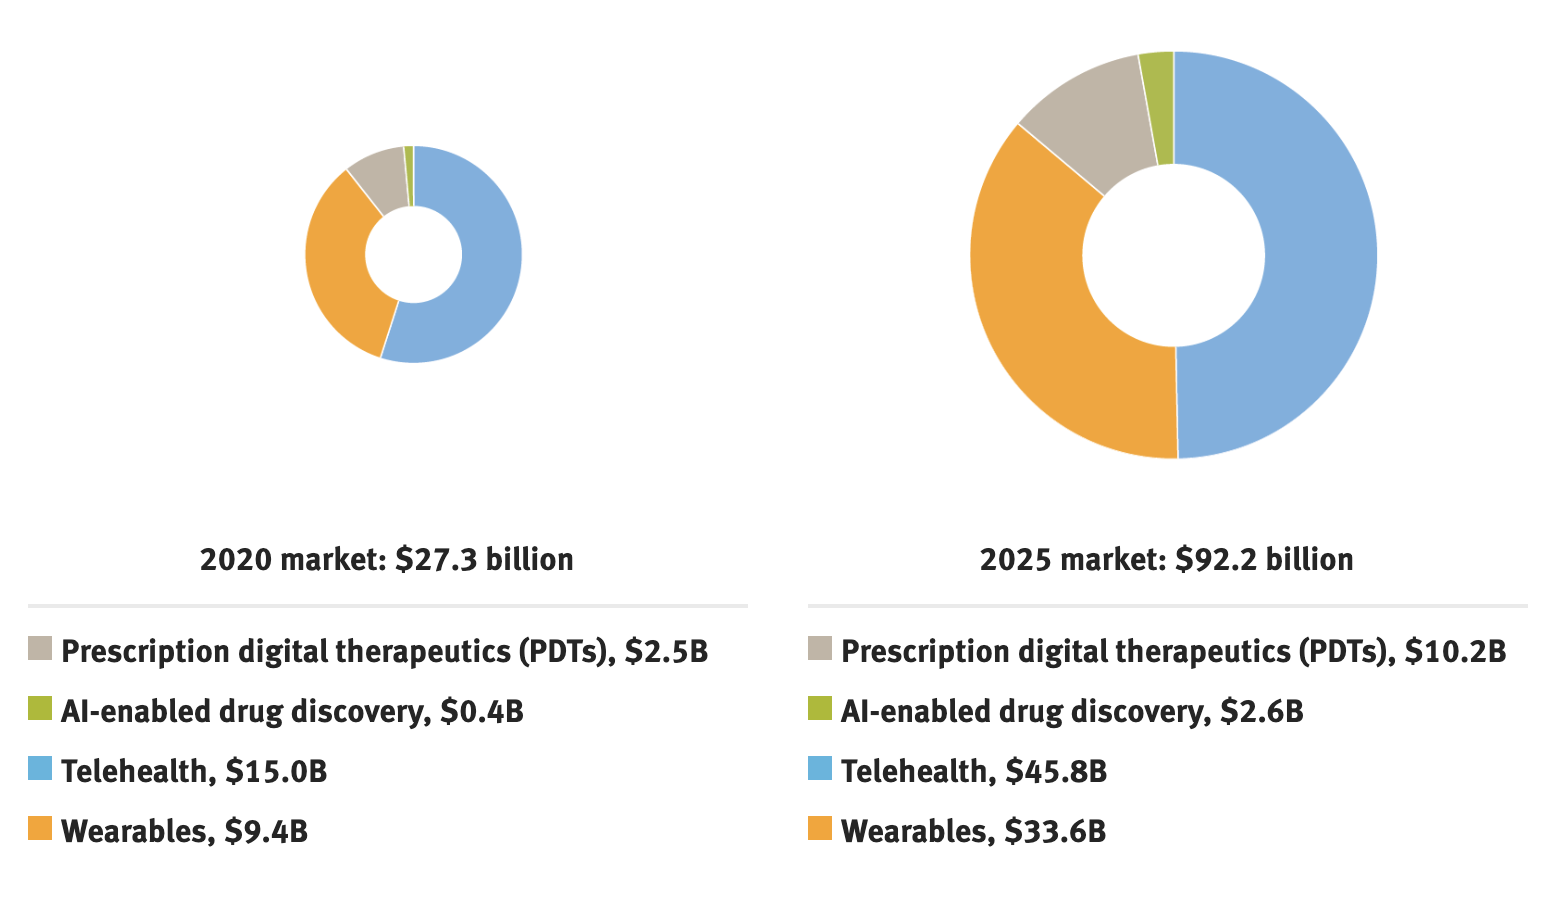 Pie chart showing data for 2020 digital health total market of $27.3 billion 2020 market: $27.3 billion... Pie chart showing data for the 2025 digital health total market of $92.2 billion (estimated). 2025 market: $92.2 billion